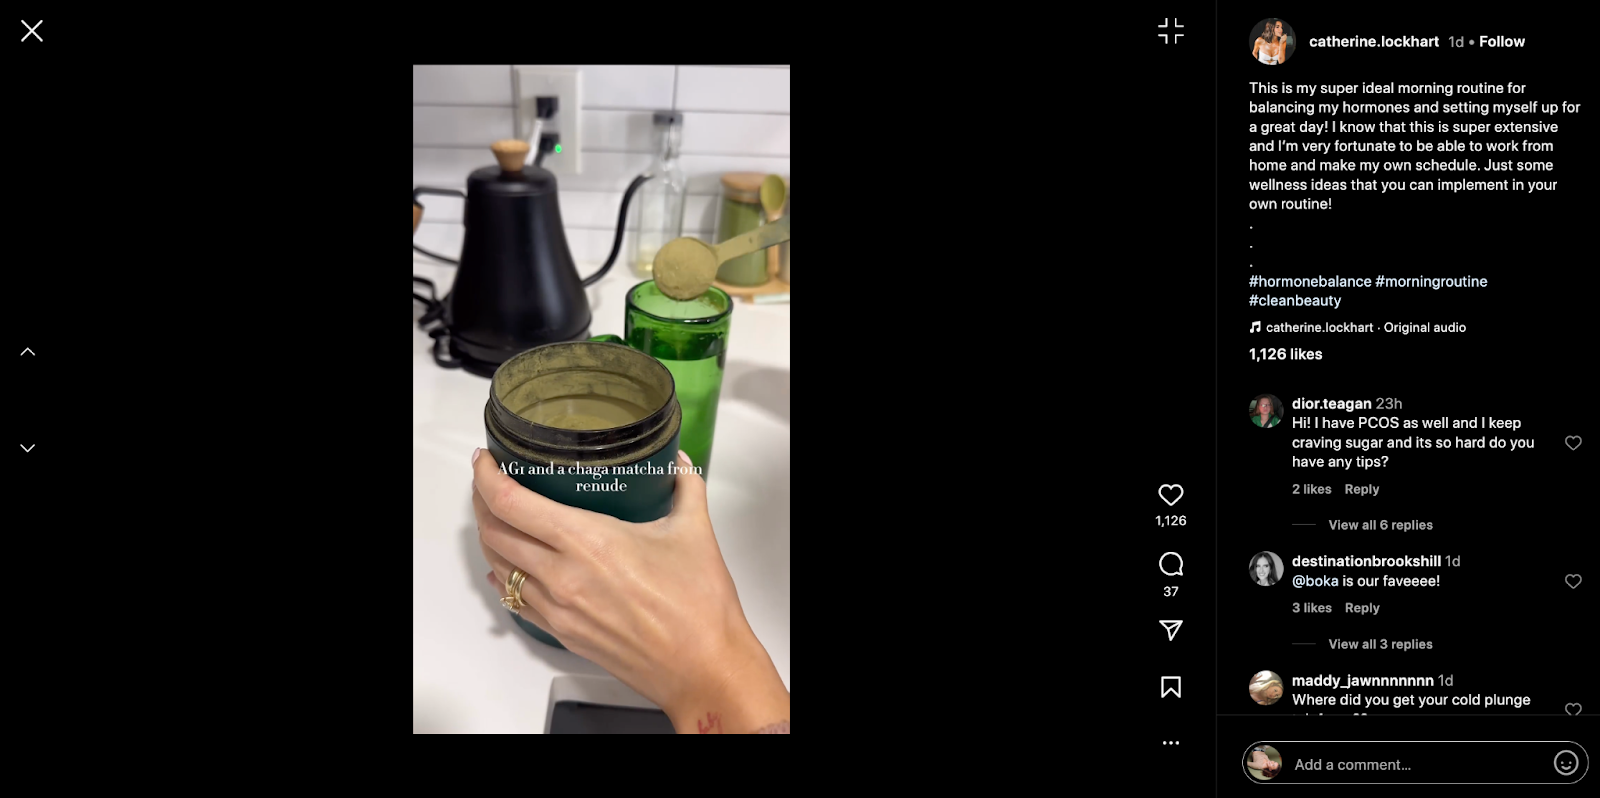 Screenshot of Instagram reel featuring lifestyle influencer preparing Athletic Greens supplement drink for her morning routine